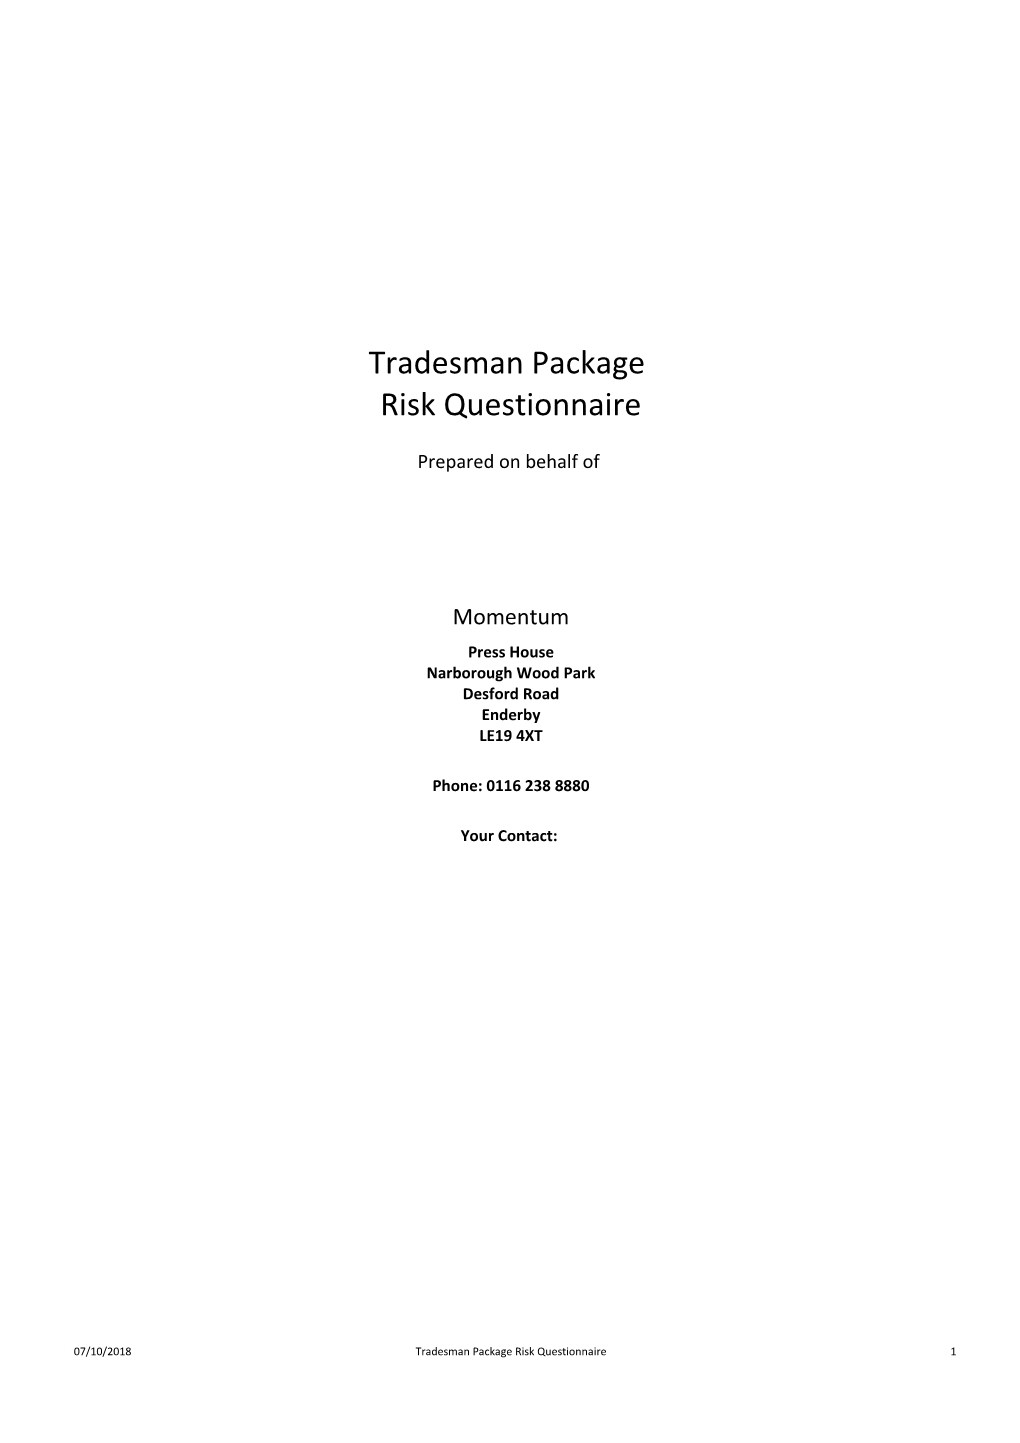 Tradesman Package Risk Questionnaire